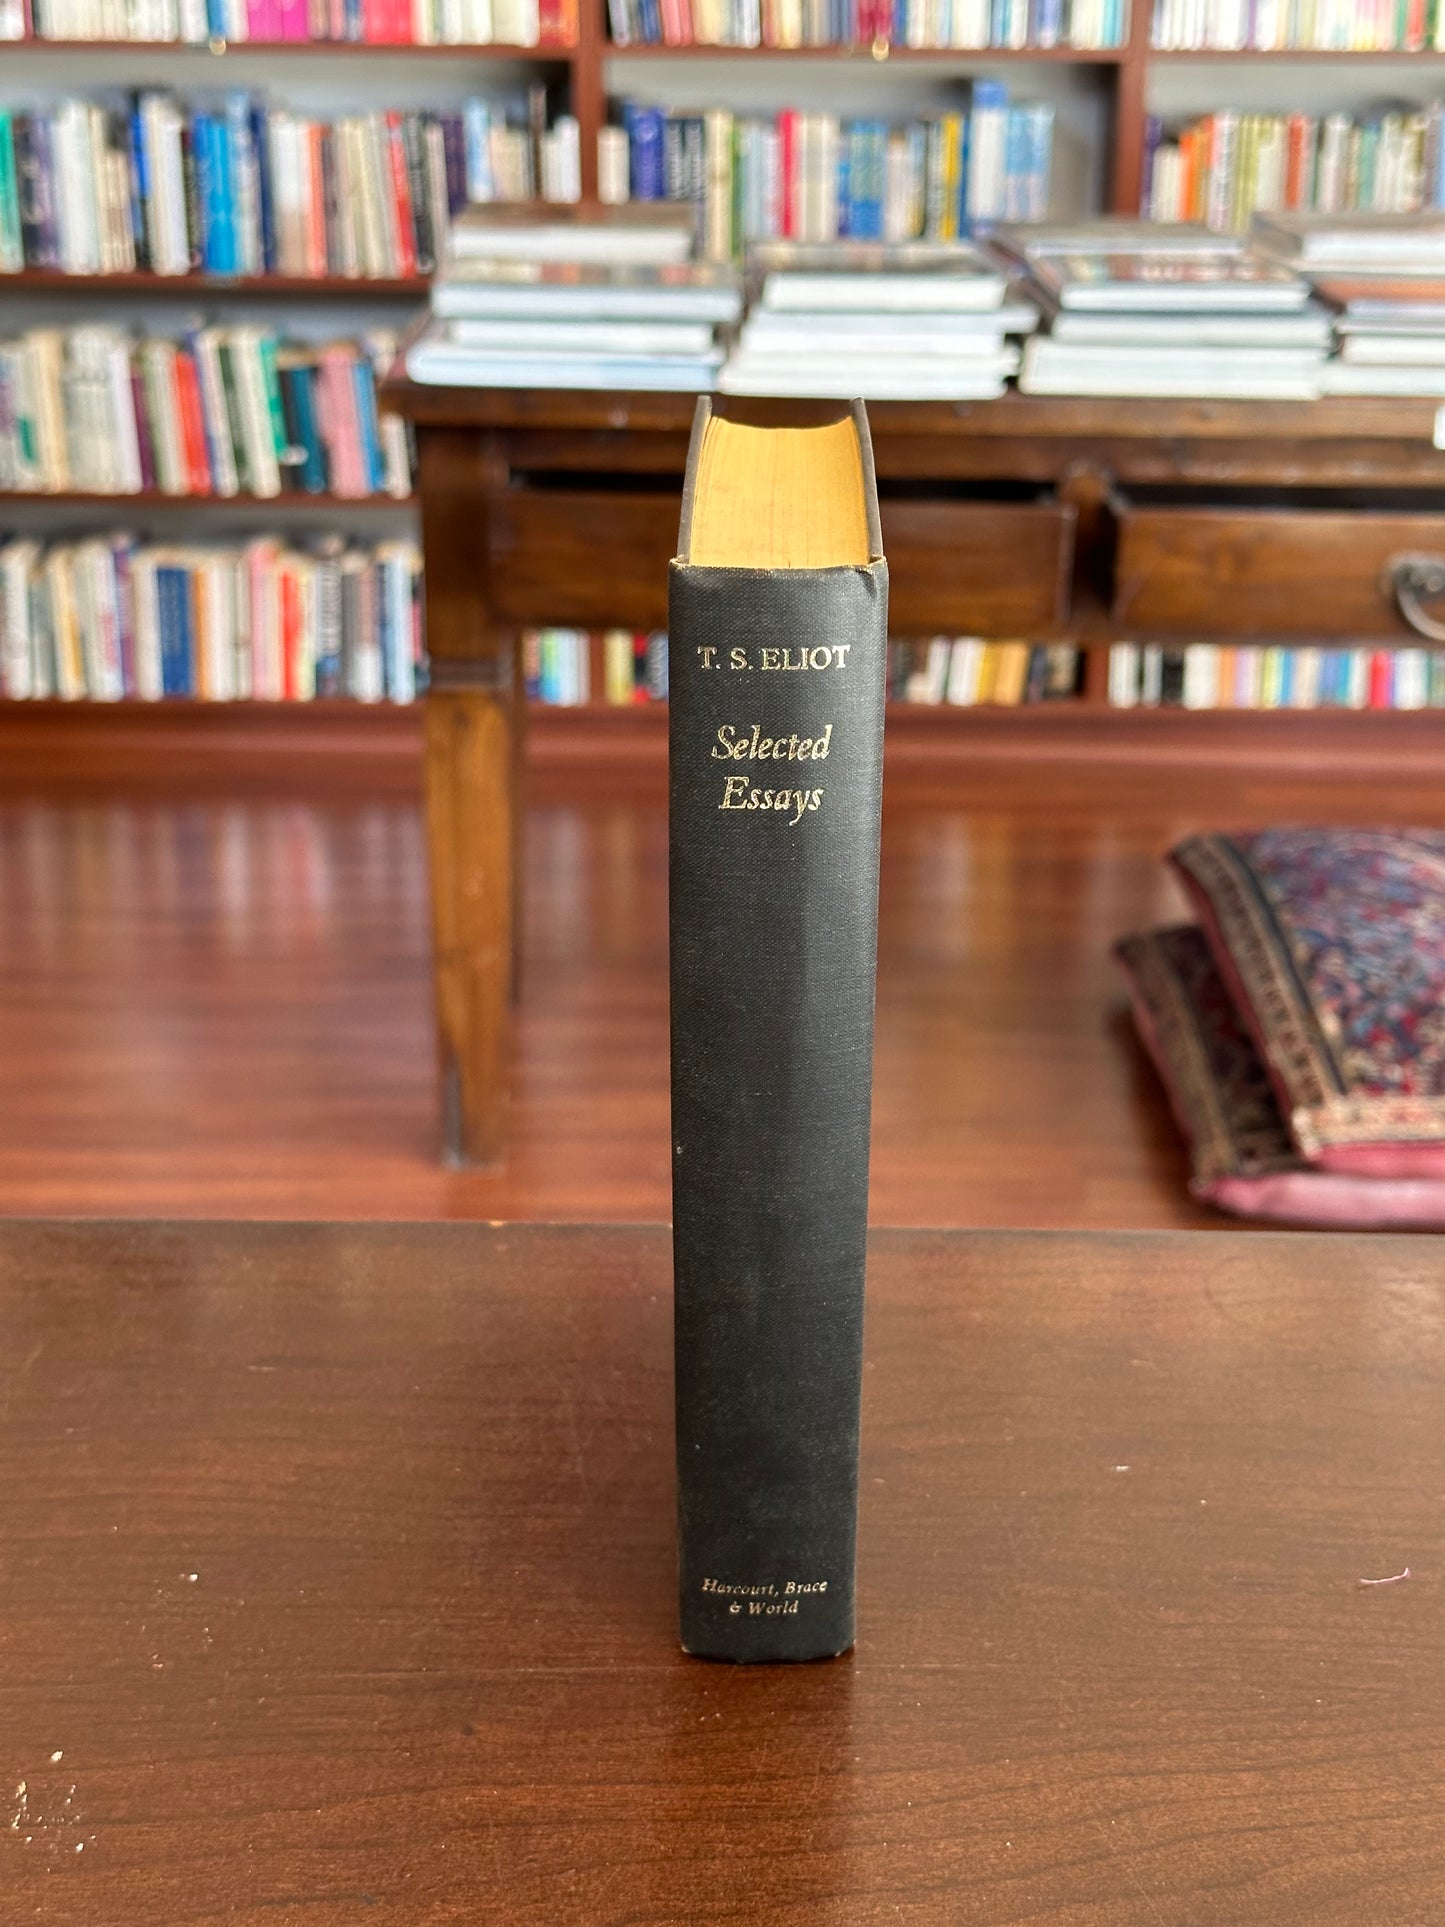 Selected Essays of T.S. Eliot (First Edition)